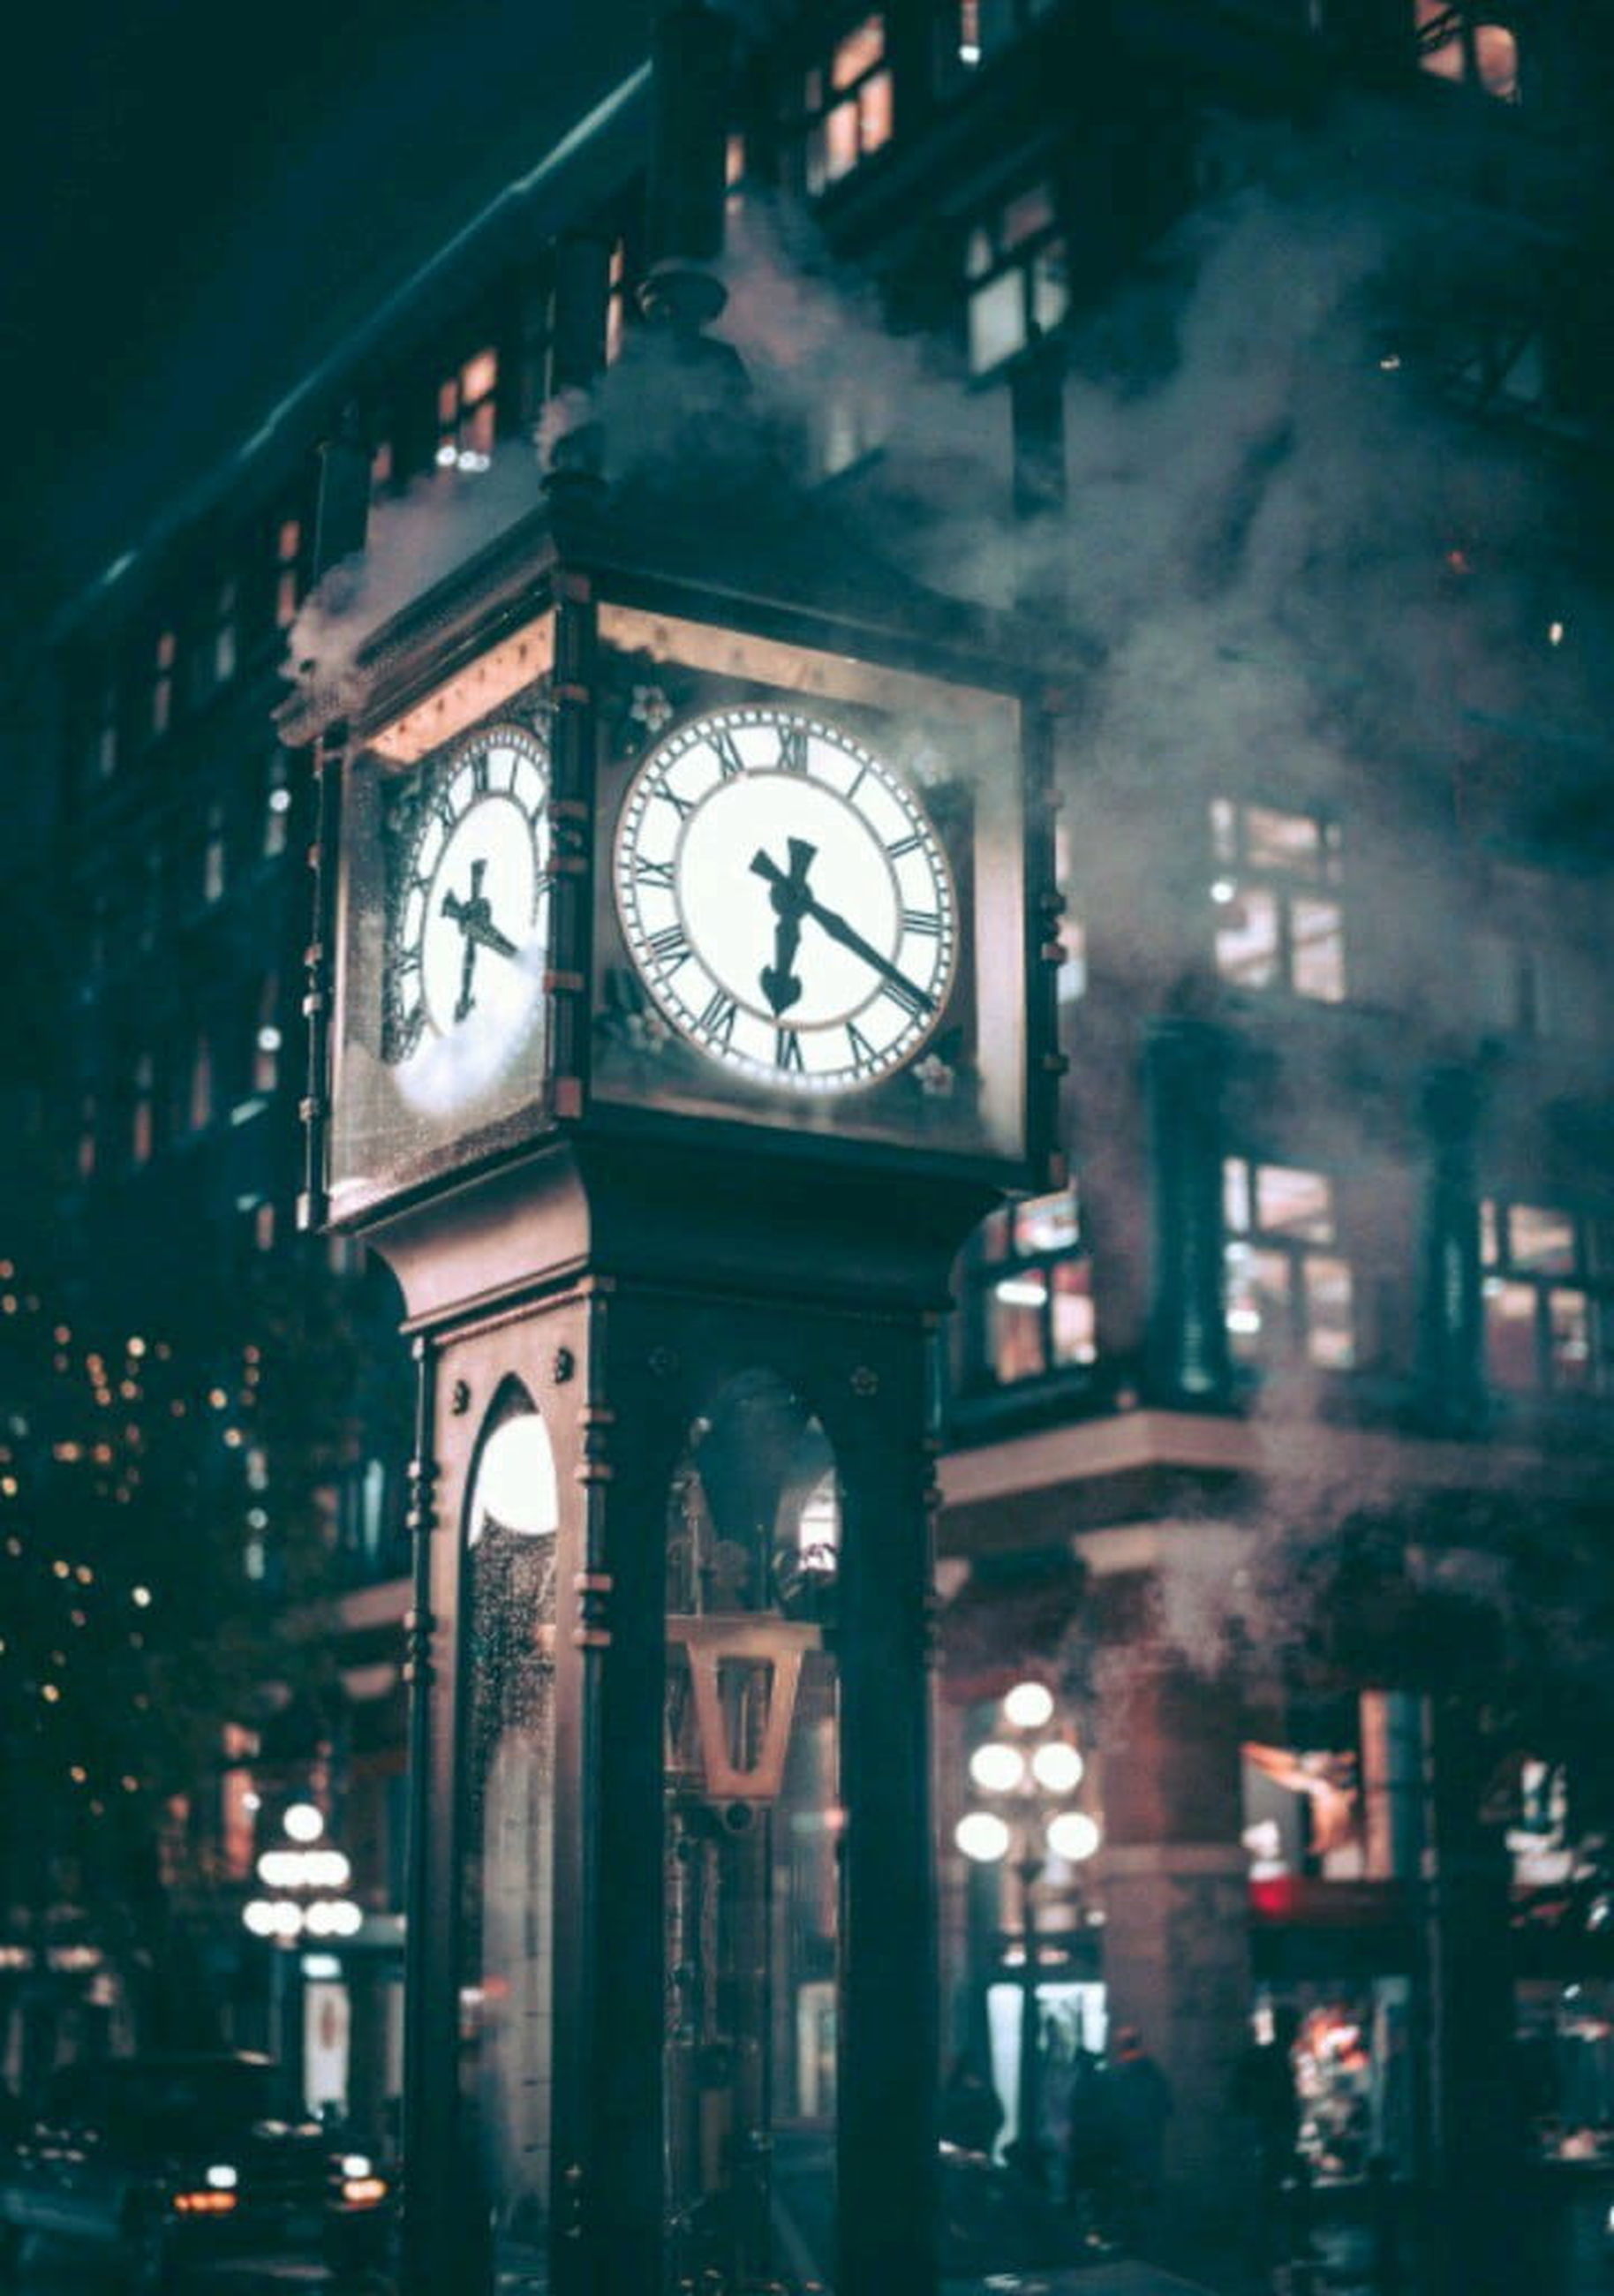 clock, time, architecture, wall clock, darkness, night, building exterior, clock face, built structure, light, city, no people, illuminated, clock tower, lighting, instrument of time, building, street, clock hand, roman numeral, travel destinations, transportation